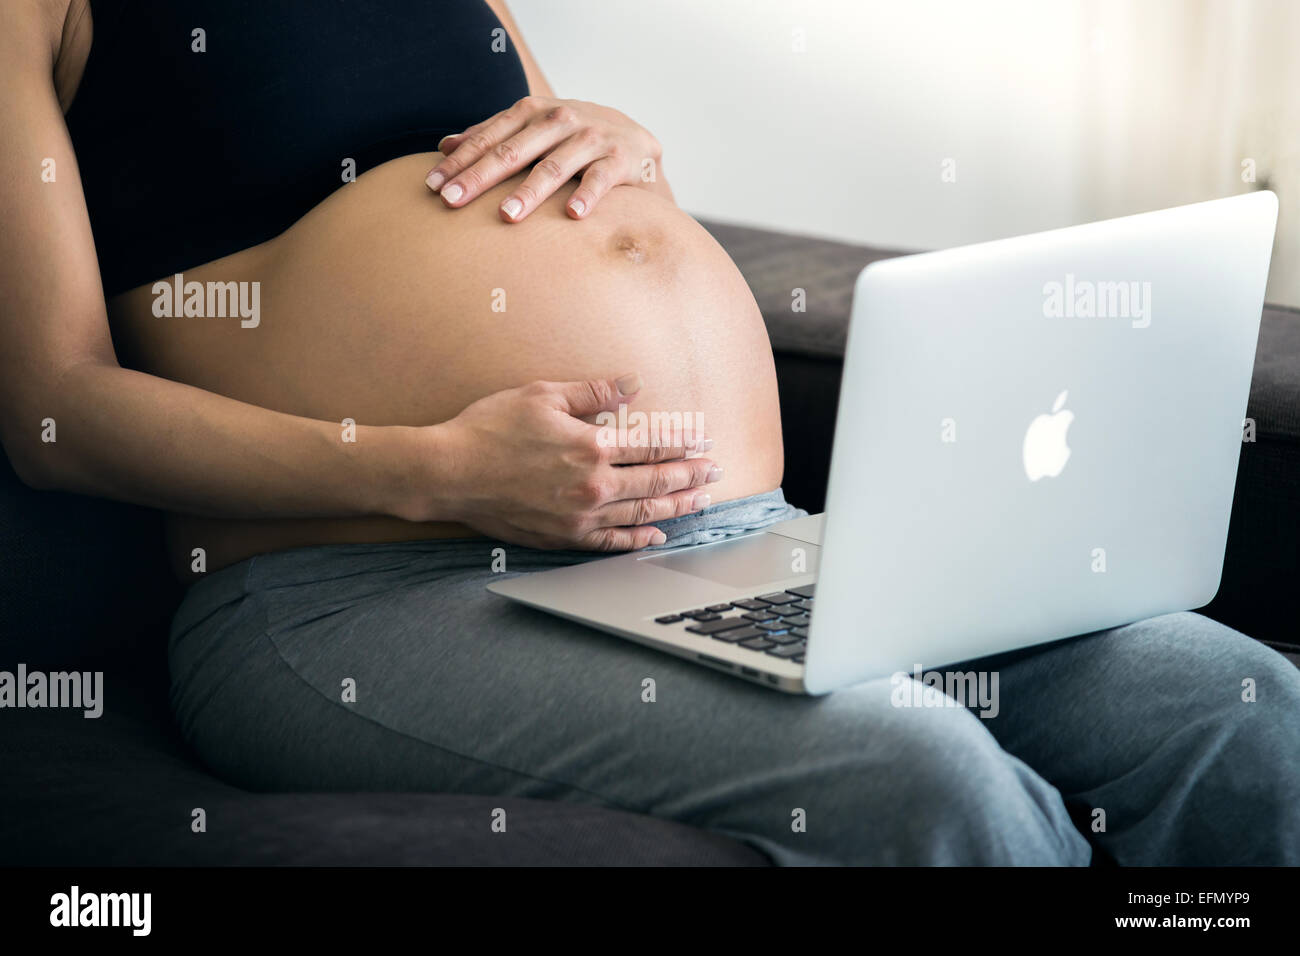 Baby bump, Image of 8 month pregnant woman sitting on a couch, with an imac laptop on her lap, holding her belly. Stock Photo